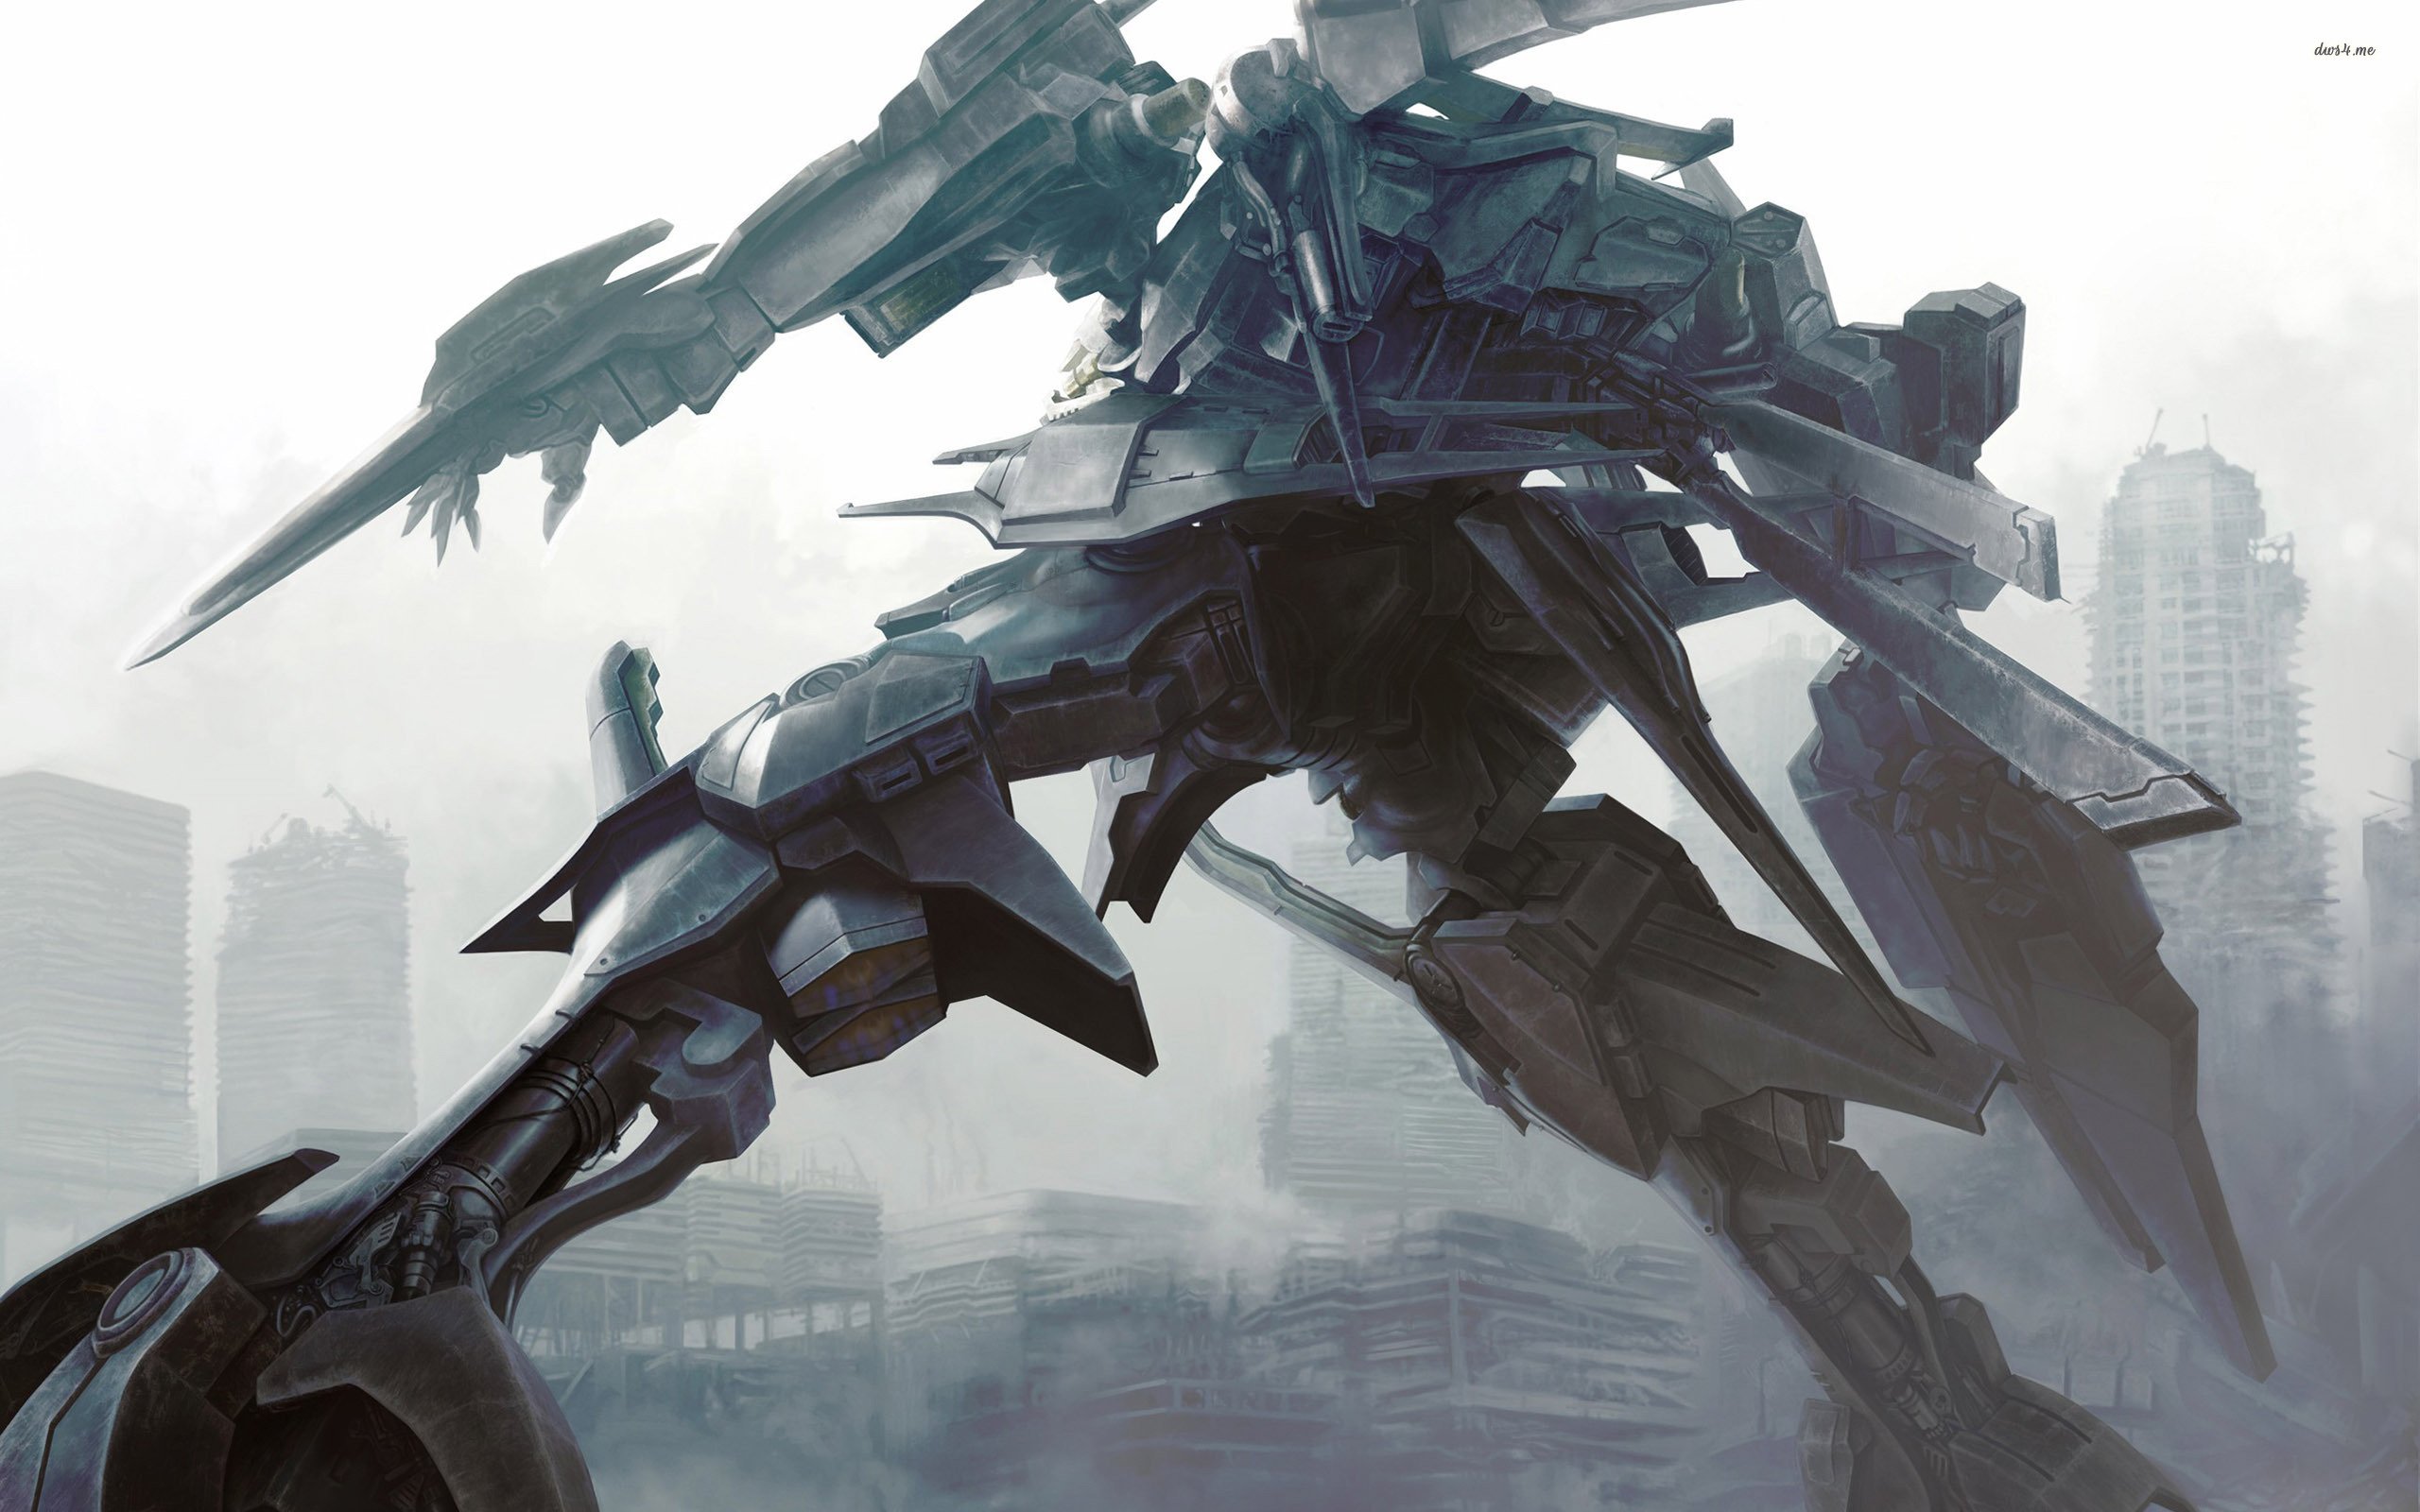 I made Armored Core wallpapers for my iPhone using images I found around  and adapted them  rarmoredcore